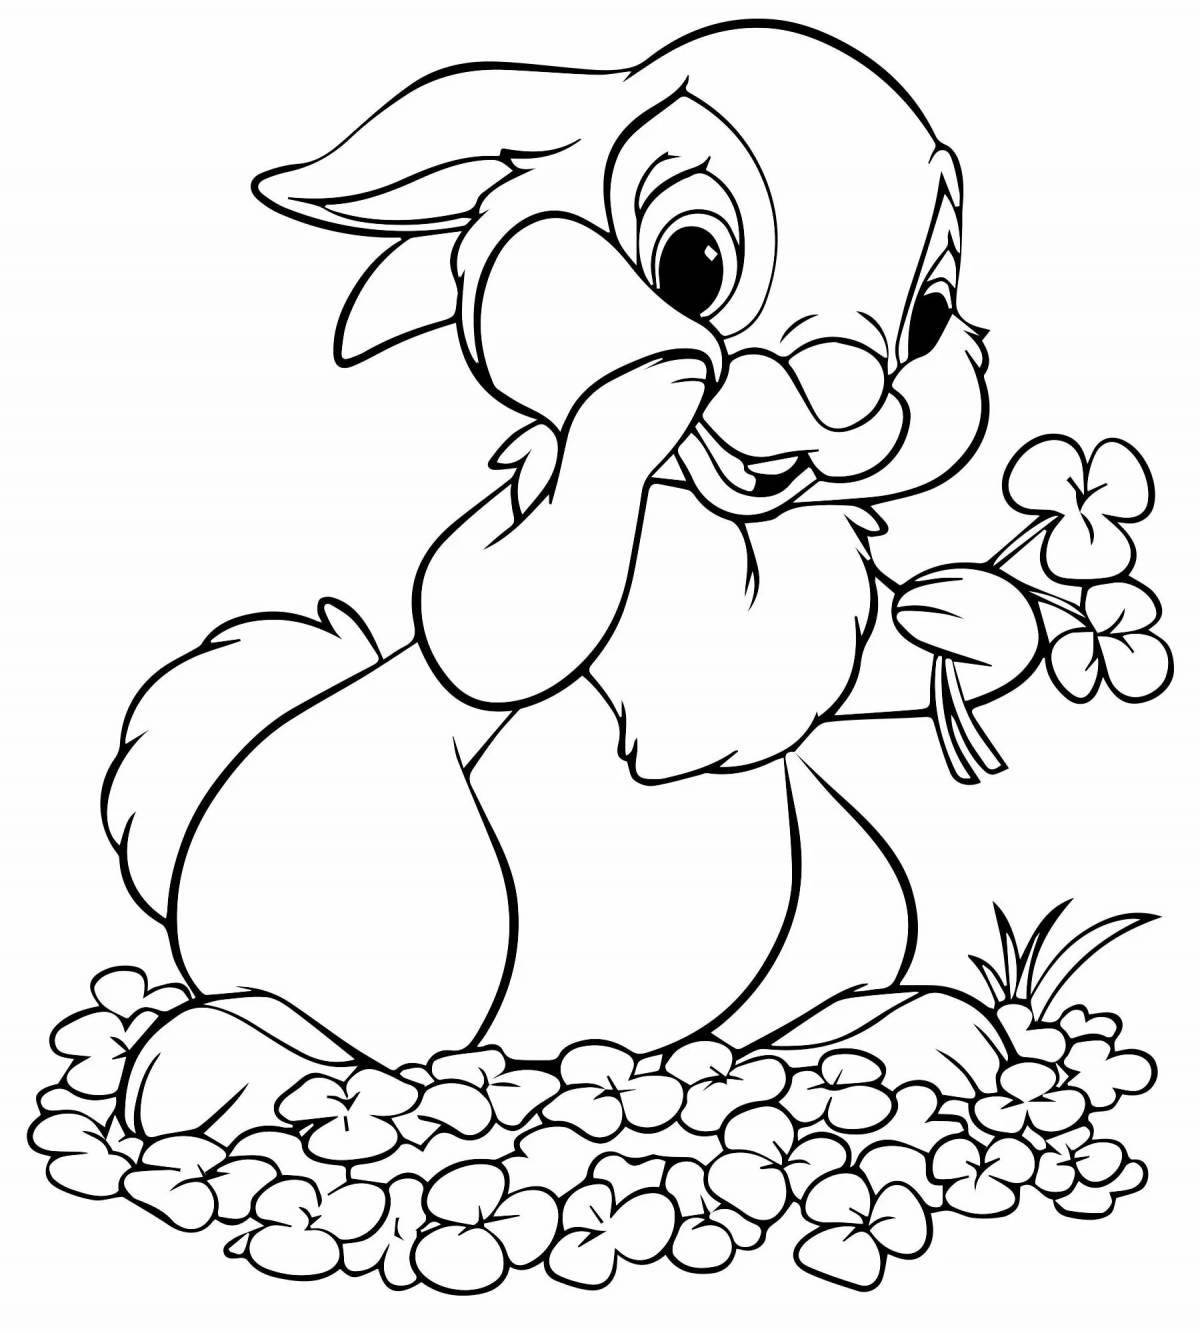 Tiny baby bunny coloring book